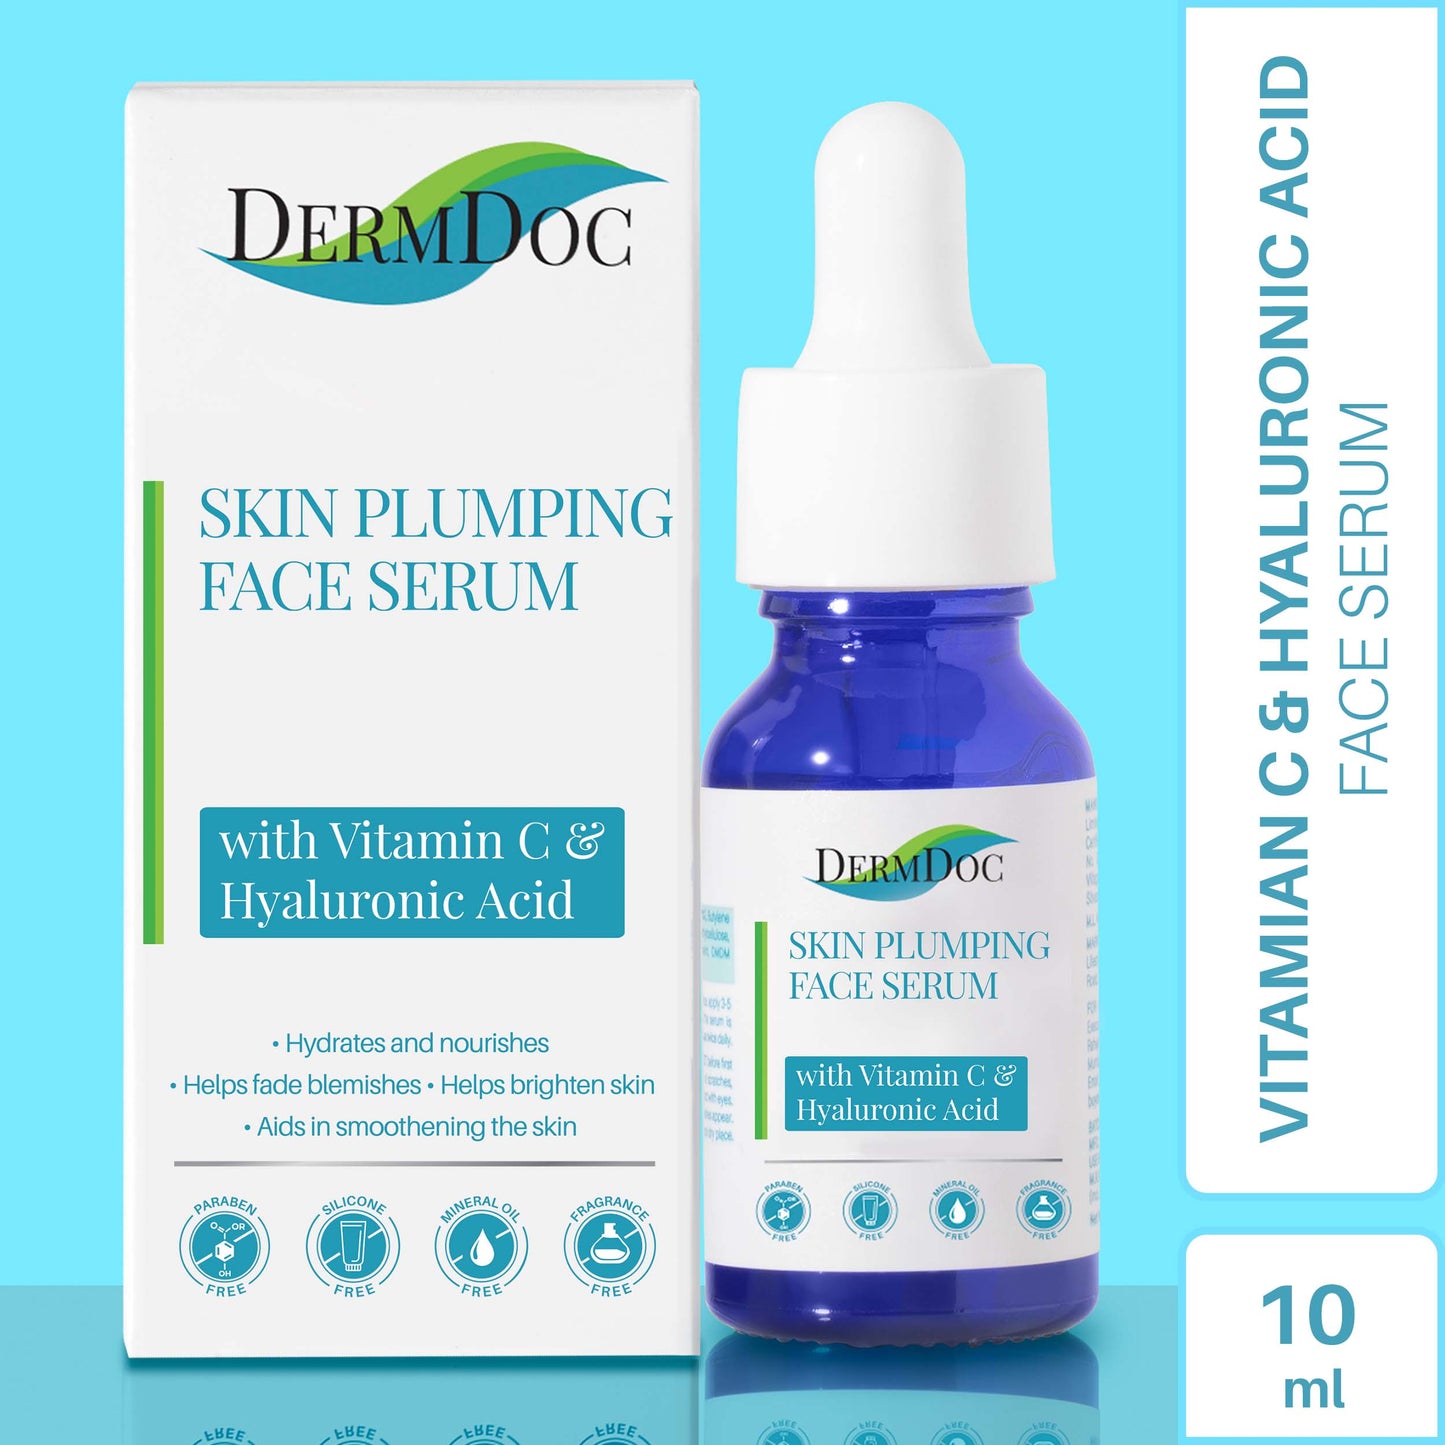 dermdoc-skin-plumping-face-serum-with-vitamin-c-and-hyaluronic-acid-10-ml-12-1